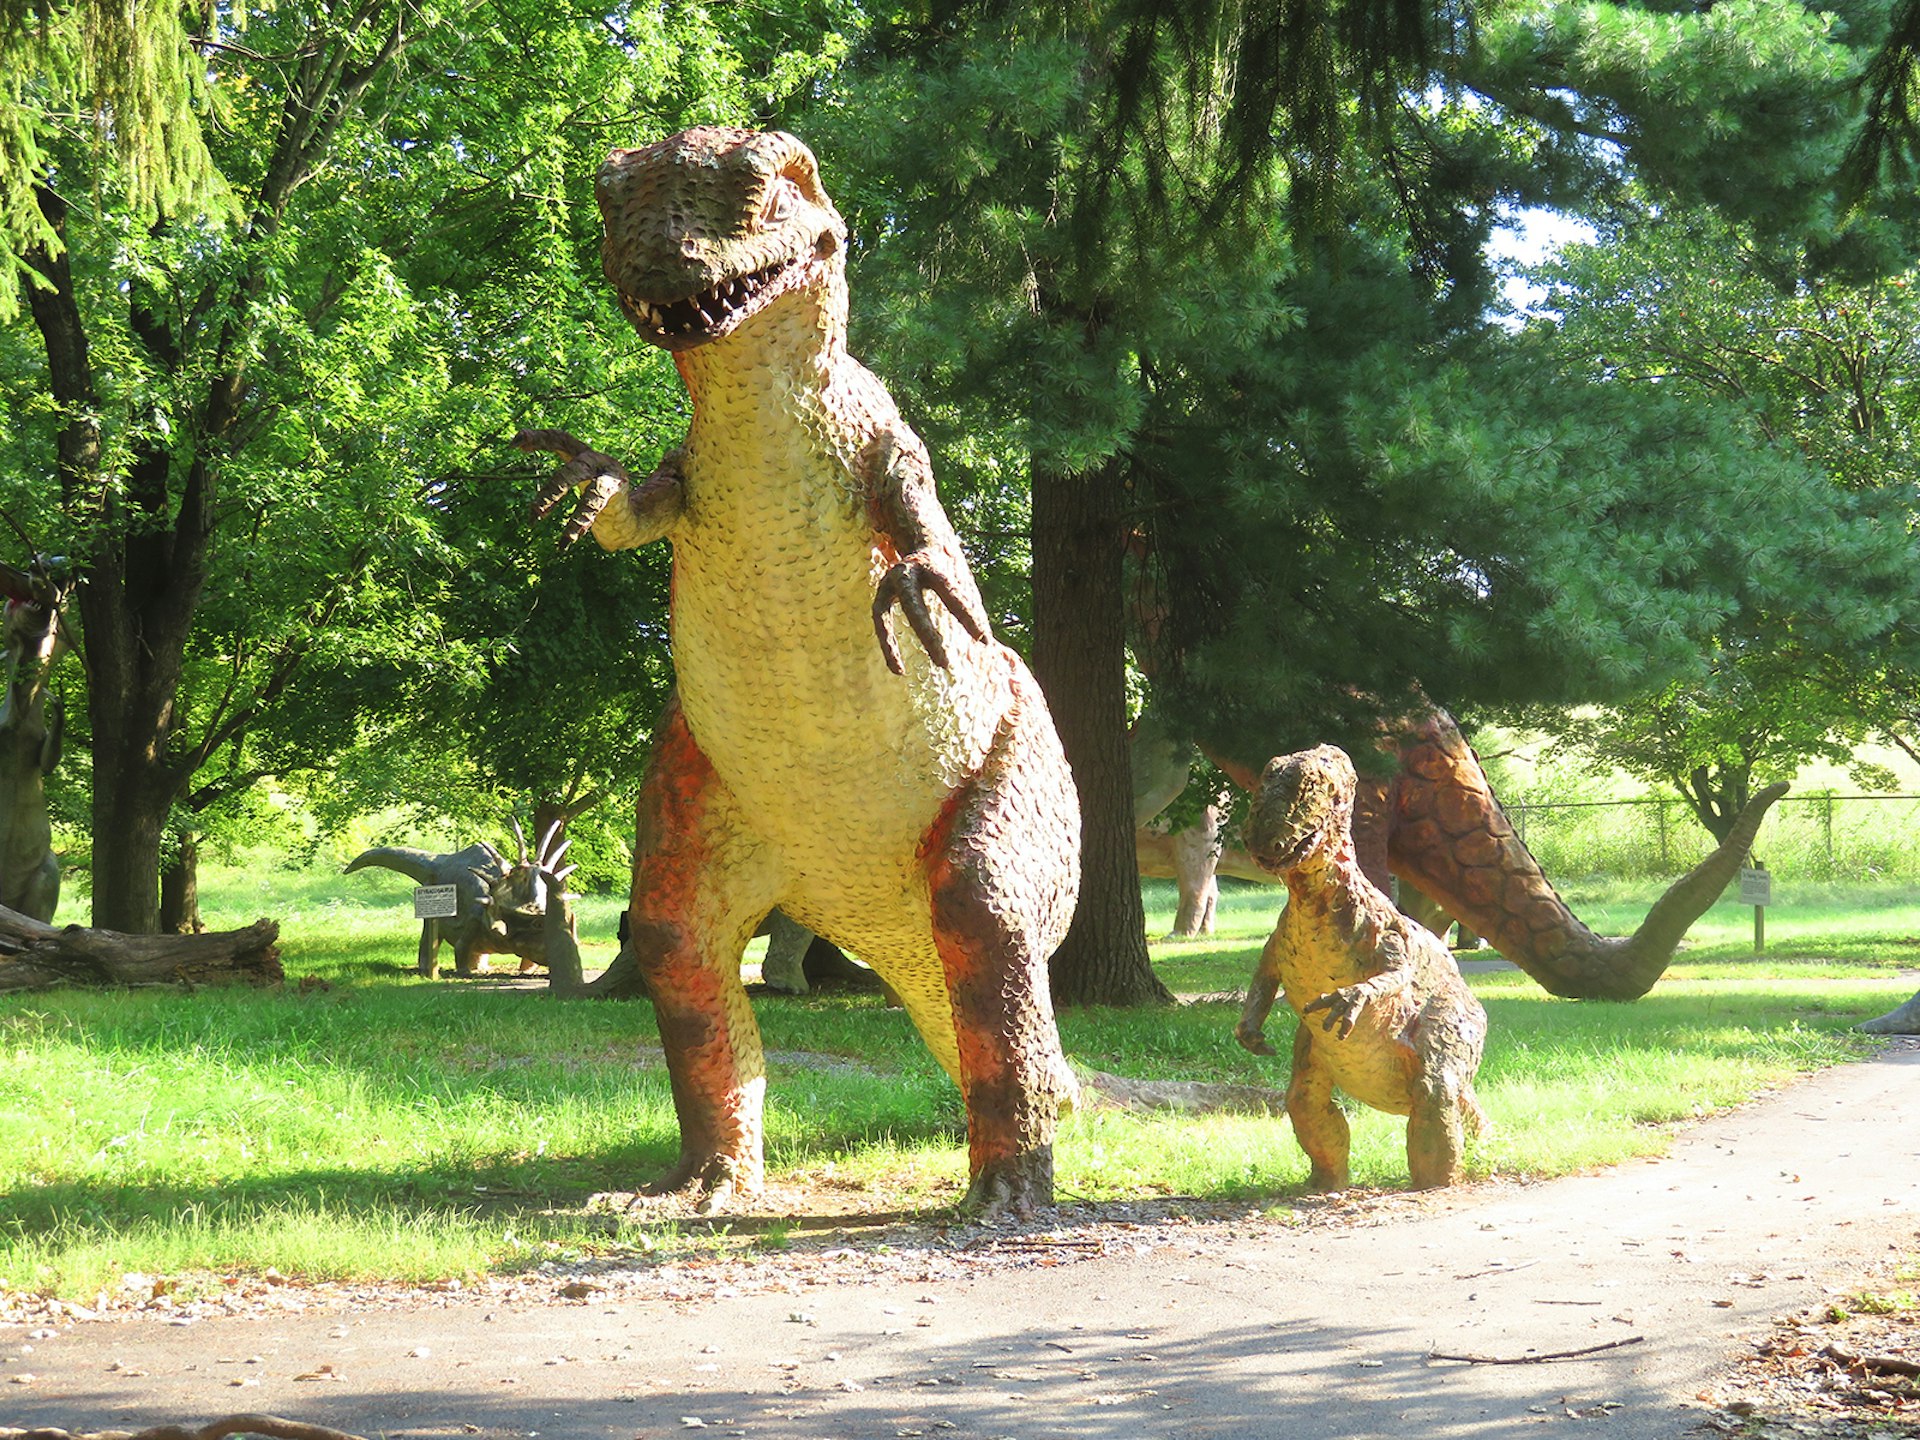 A large fiberglass T Rex is followed by a baby T Rex along a dirt path framed with old trees at a park in the Shenandoah Valley during the summer